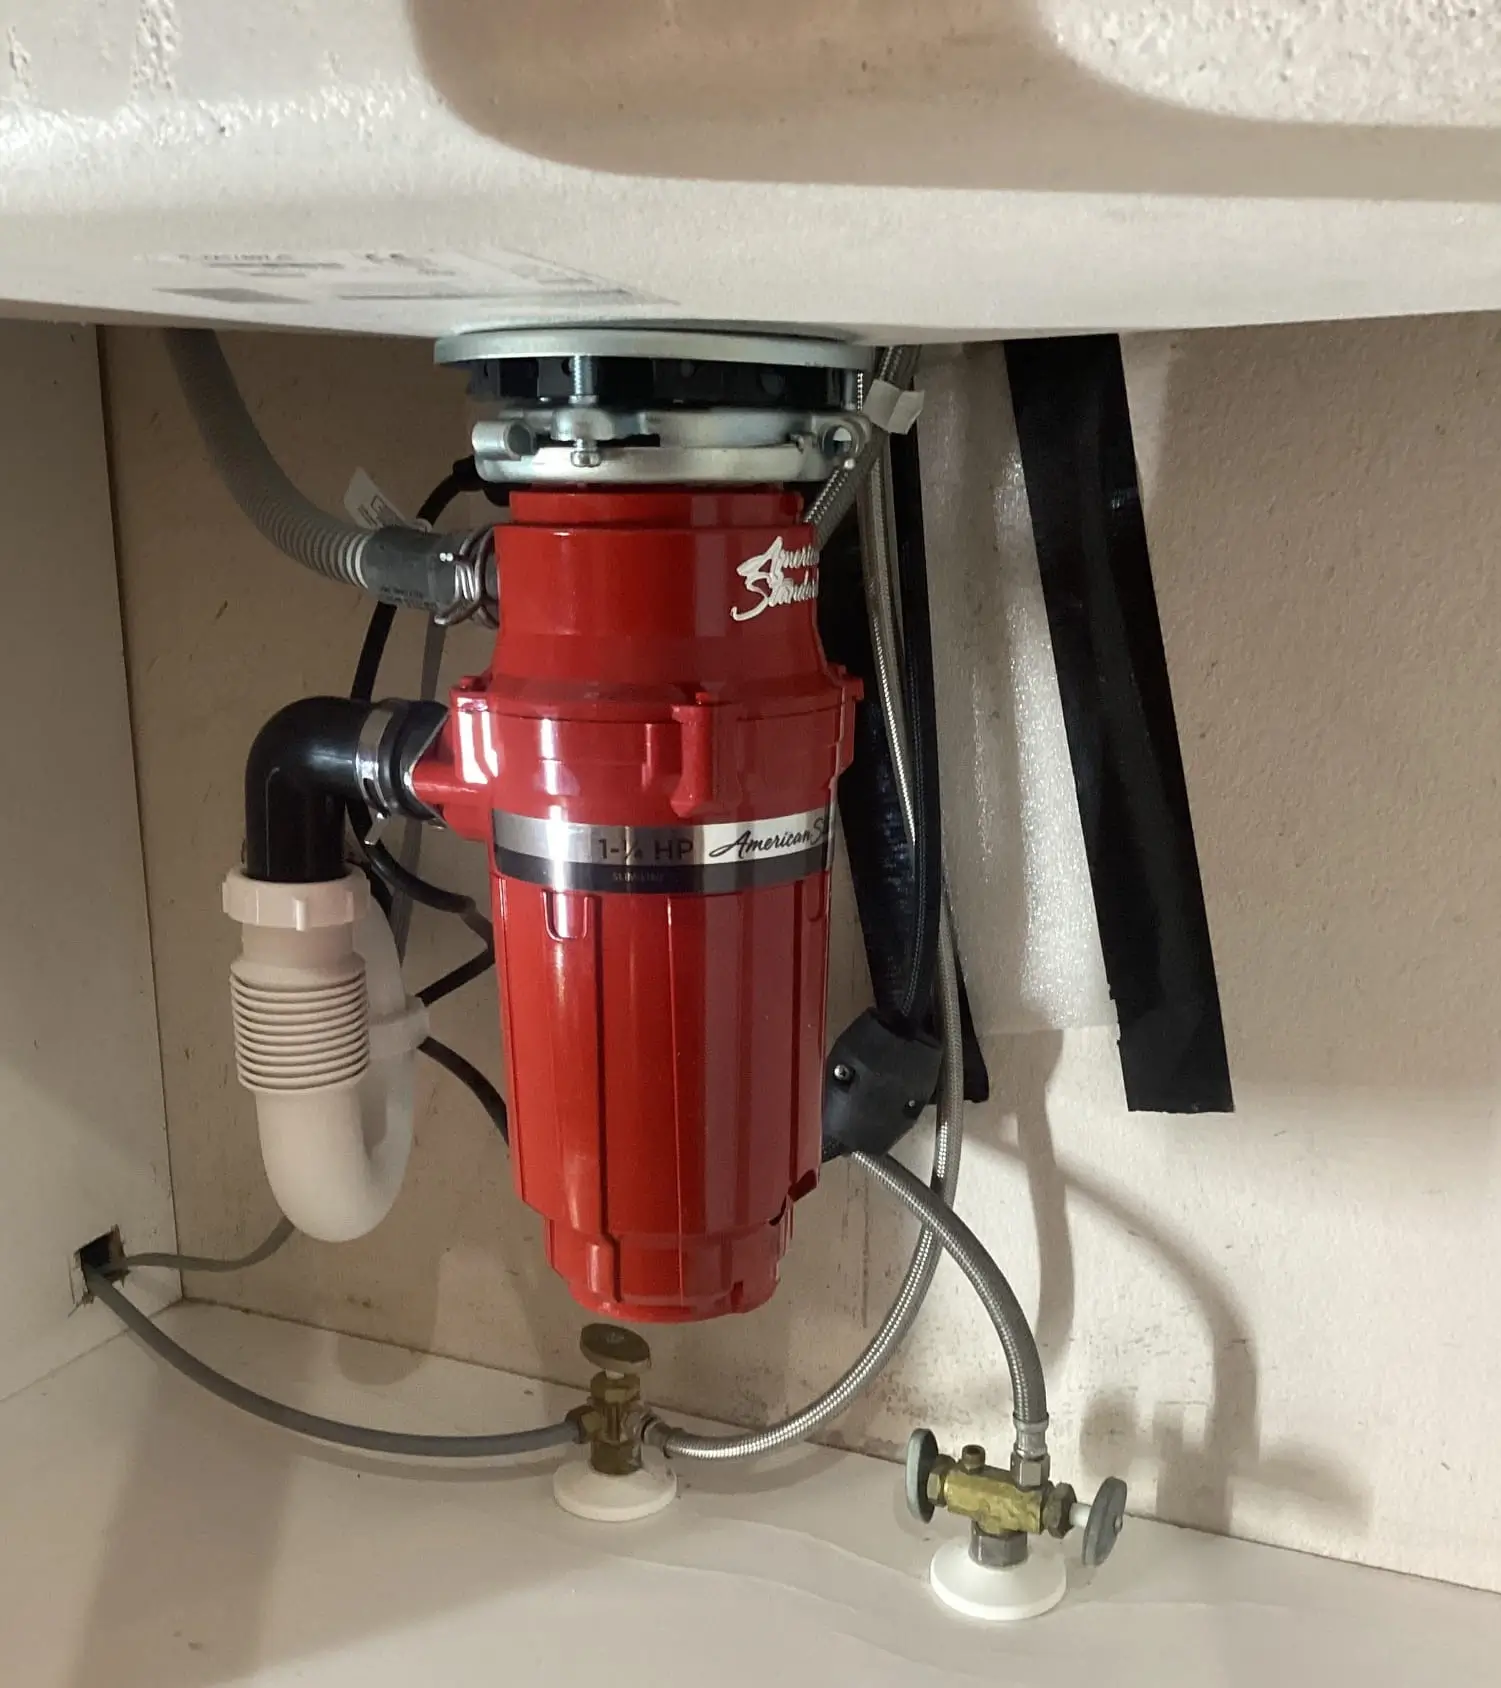 A newly installed red garbage disposal under a sink